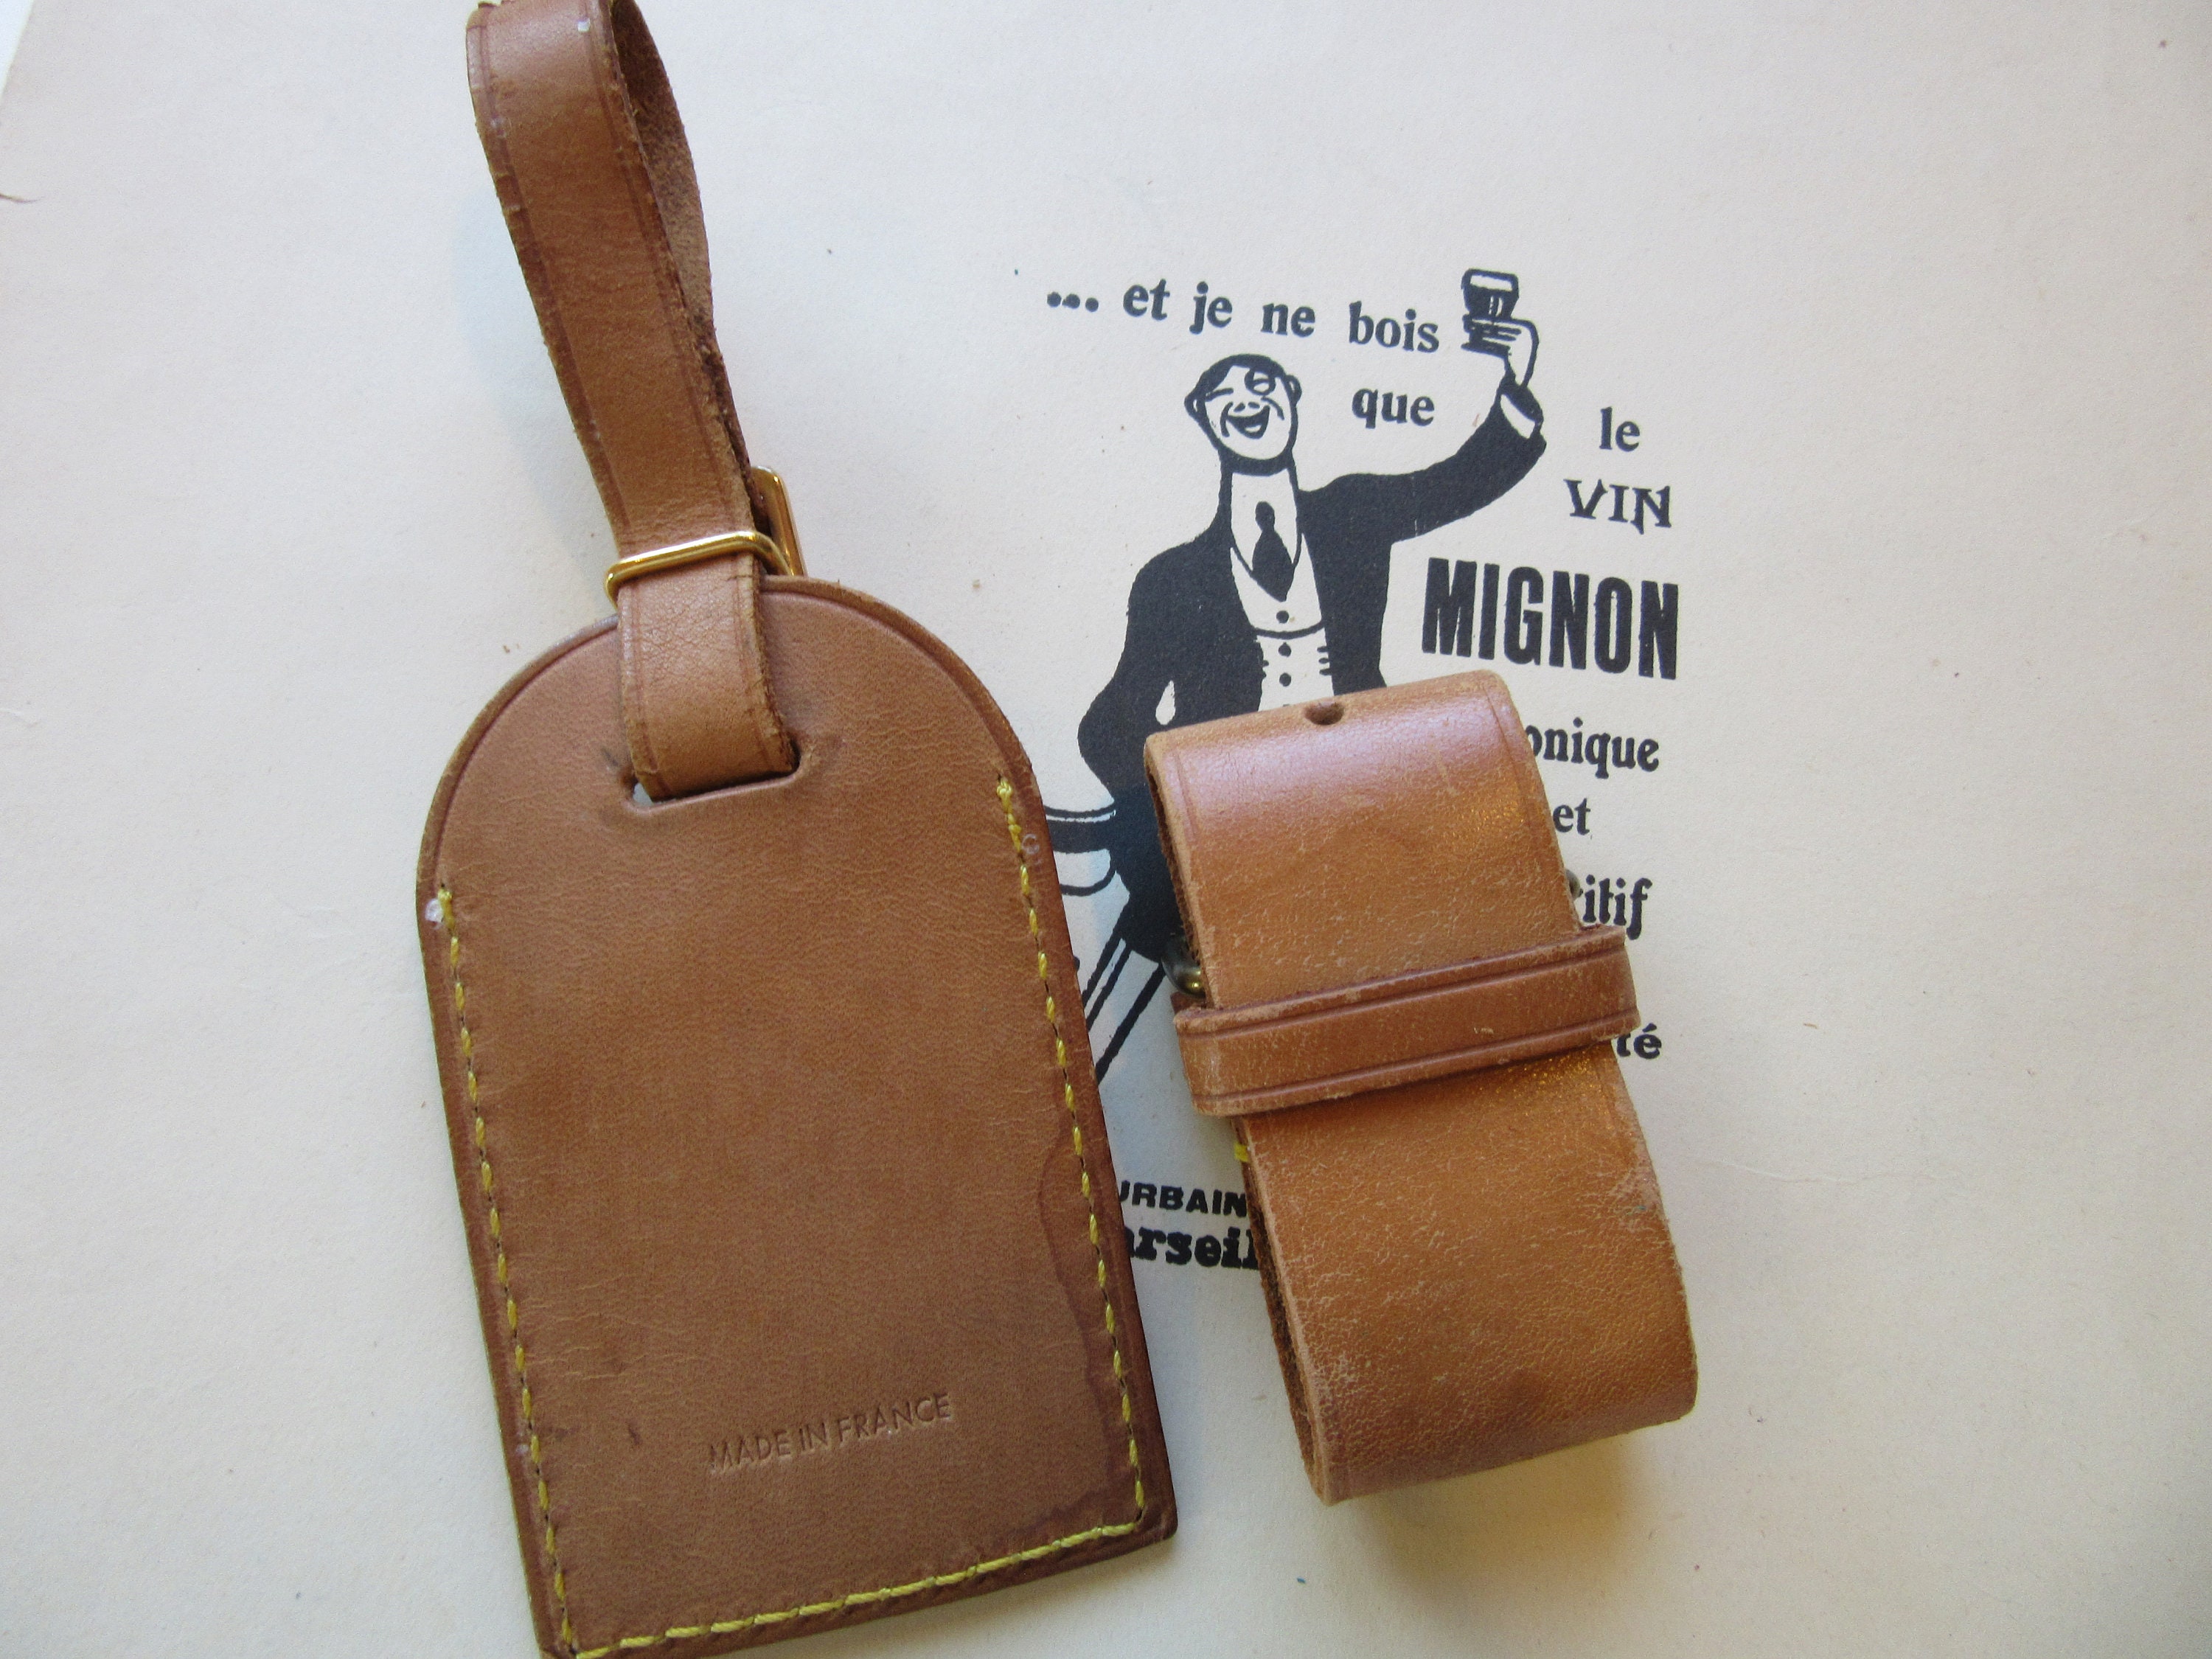 LV (choice Une) Louis Vuitton Luggage Tag Vintage Leather Made in France -  Vintage - Once Loved - Some Vintage Wear From Use - Lovely Louis!